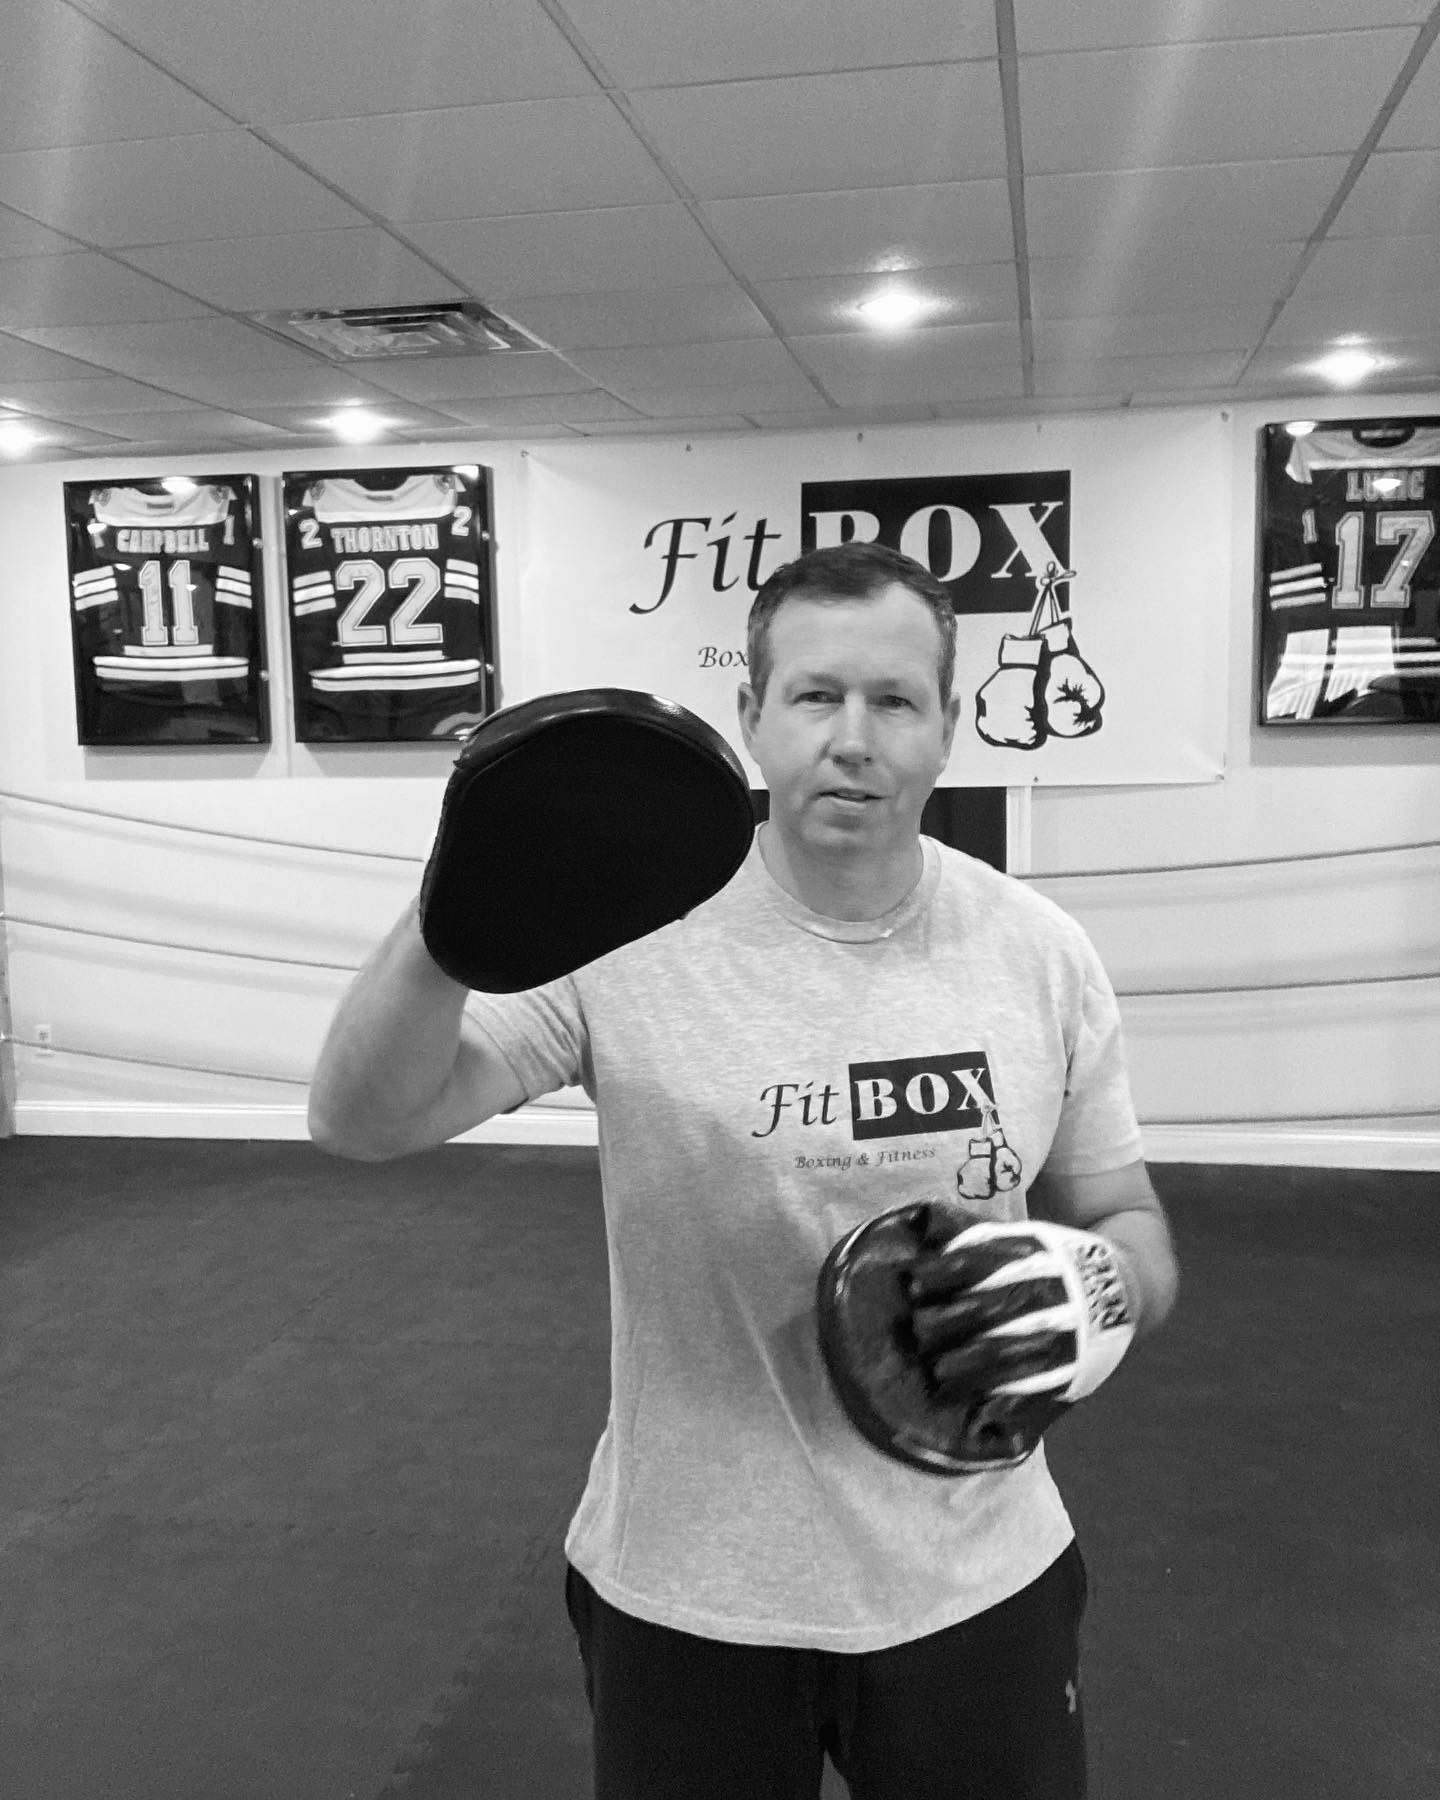 Don’t miss out and sign up now there are few openings for 1-on-1 boxing sessions in the early morning or the afternoon with Boston’s well-known boxing trainer @tommymcinerney . Contact us today at phone/text 781-727-9503 or email fitbox@outlook.com